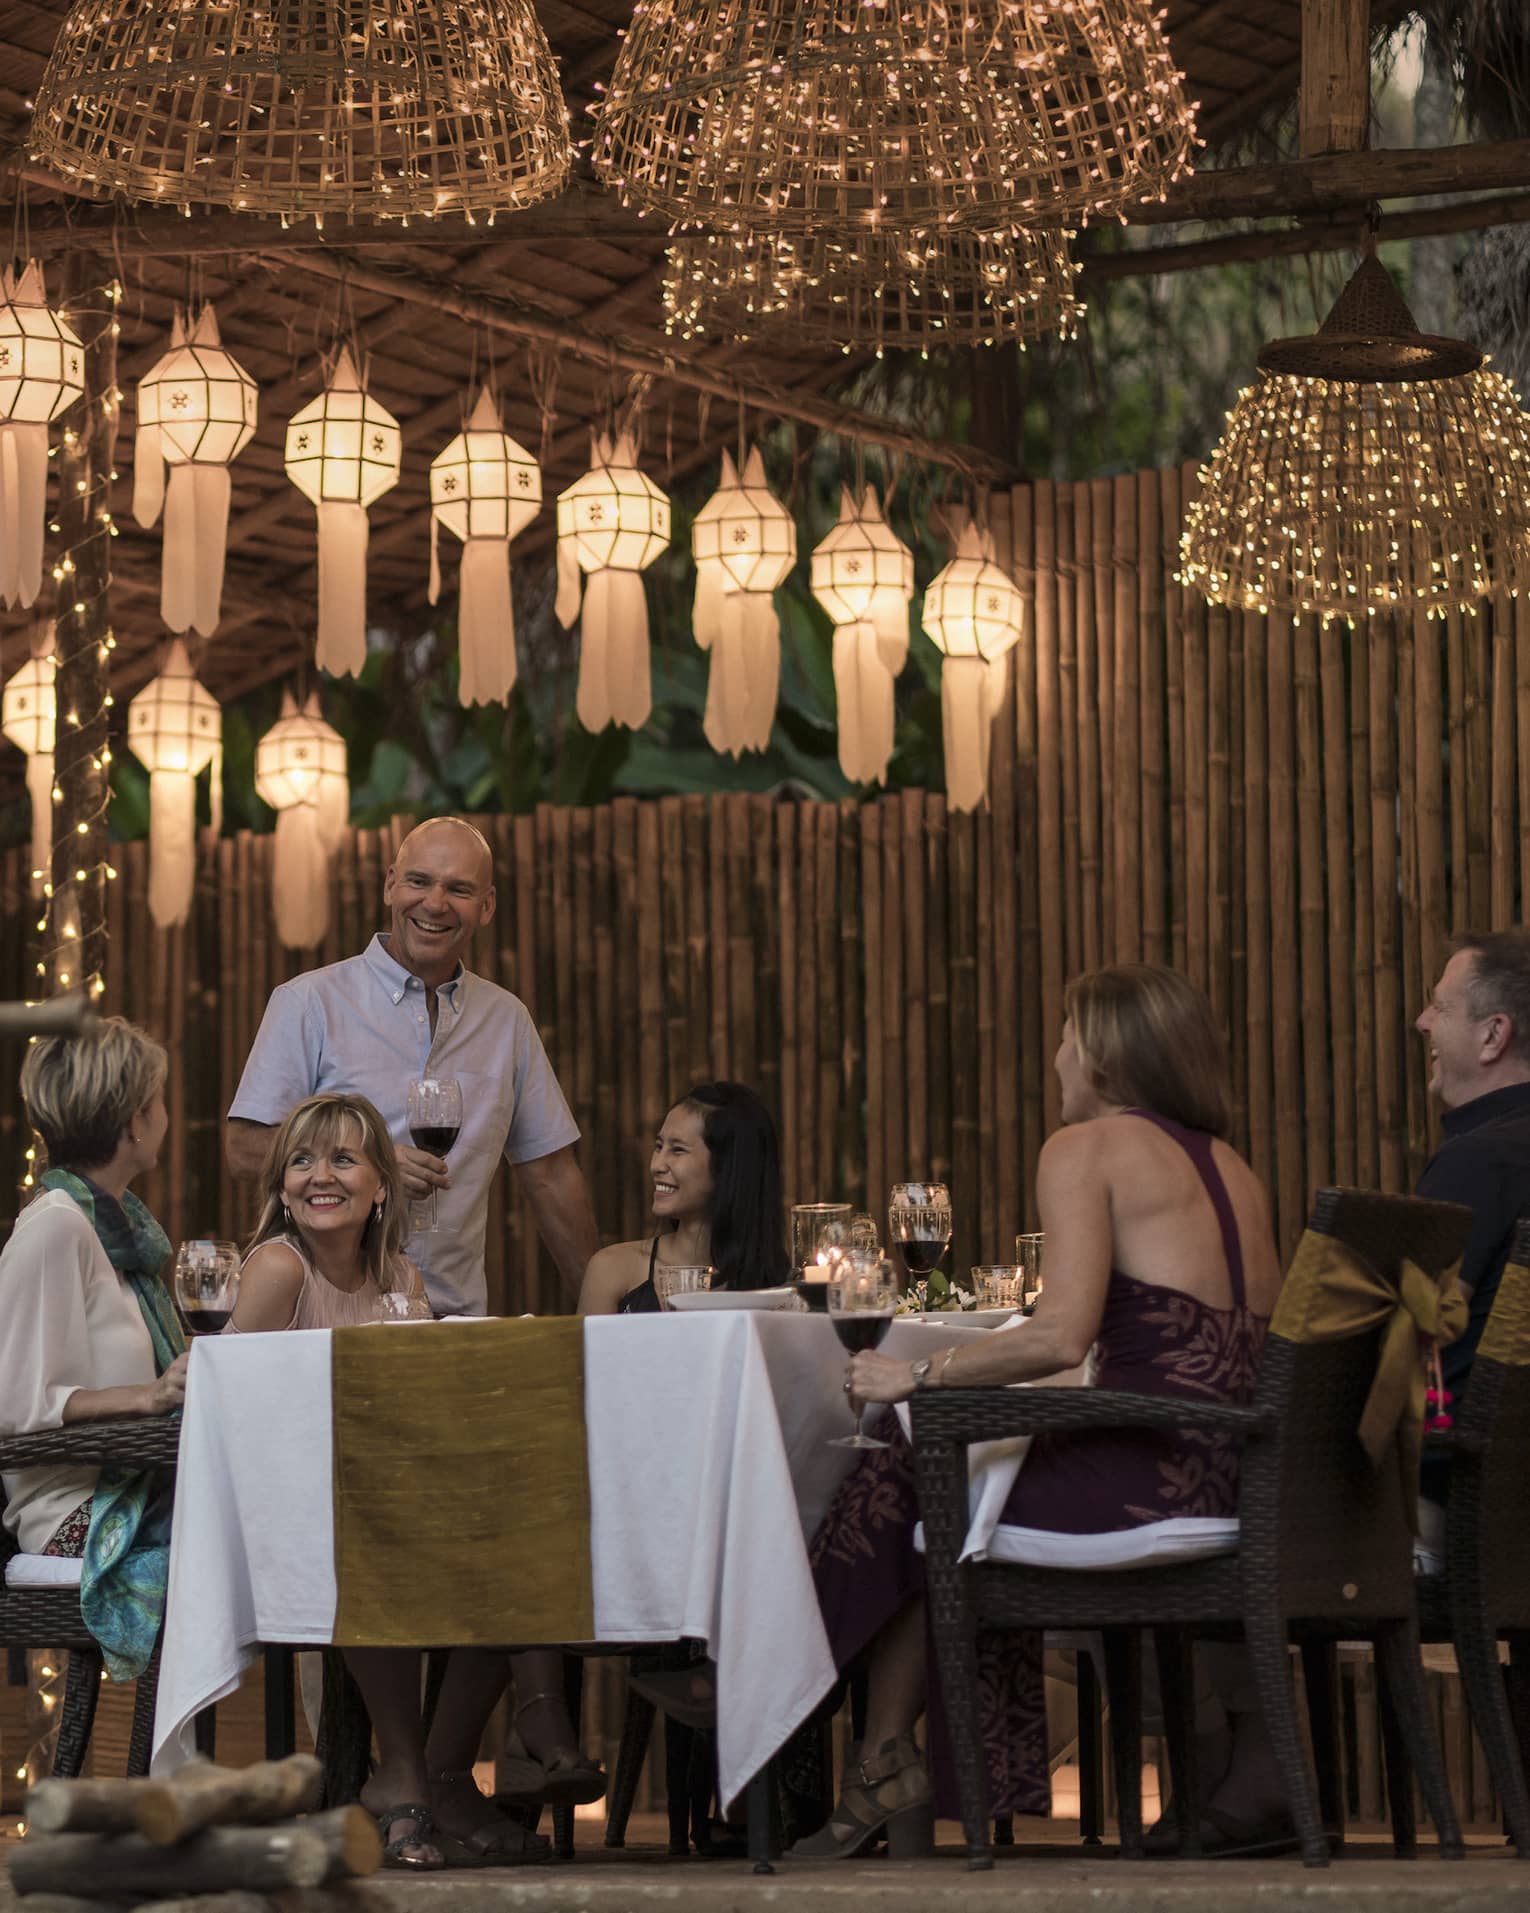 A group of people sitting at a table enjoying a meal in outdoor pavilion decorated with lanterns